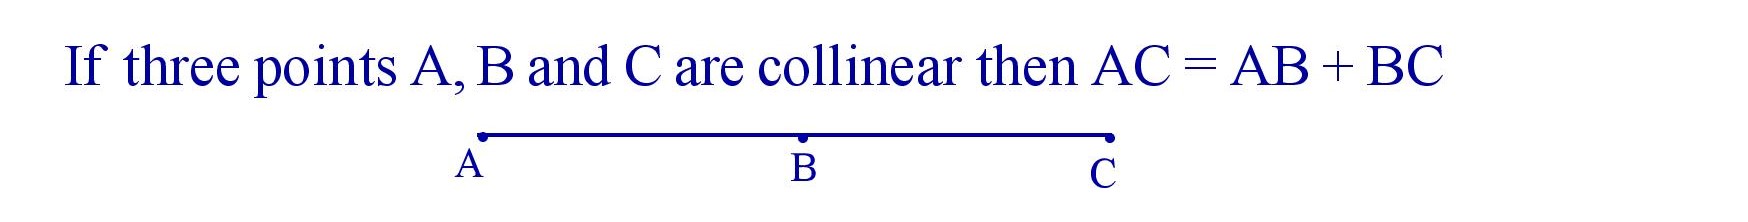 If three points are collinear